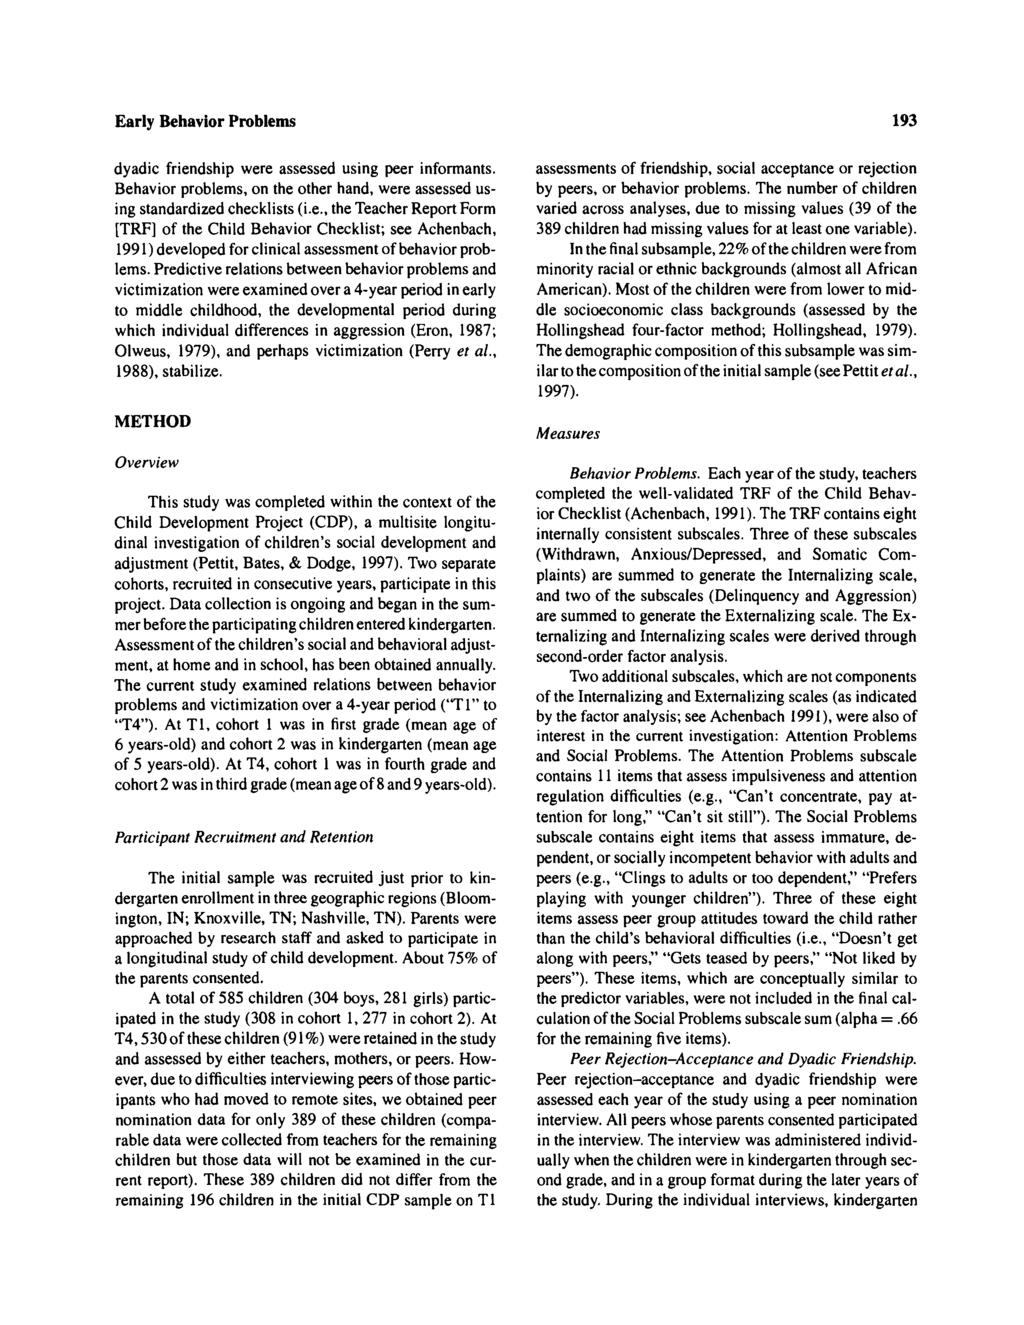 Early Behavior Problems 93 dyadic friendship were assessed using peer informants. Behavior problems, on the other hand, were assessed using standardized checklists (i.e., the Teacher Report Form [TRF] of the Child Behavior Checklist; see Achenbach, 99) developed for clinical assessment of behavior problems.